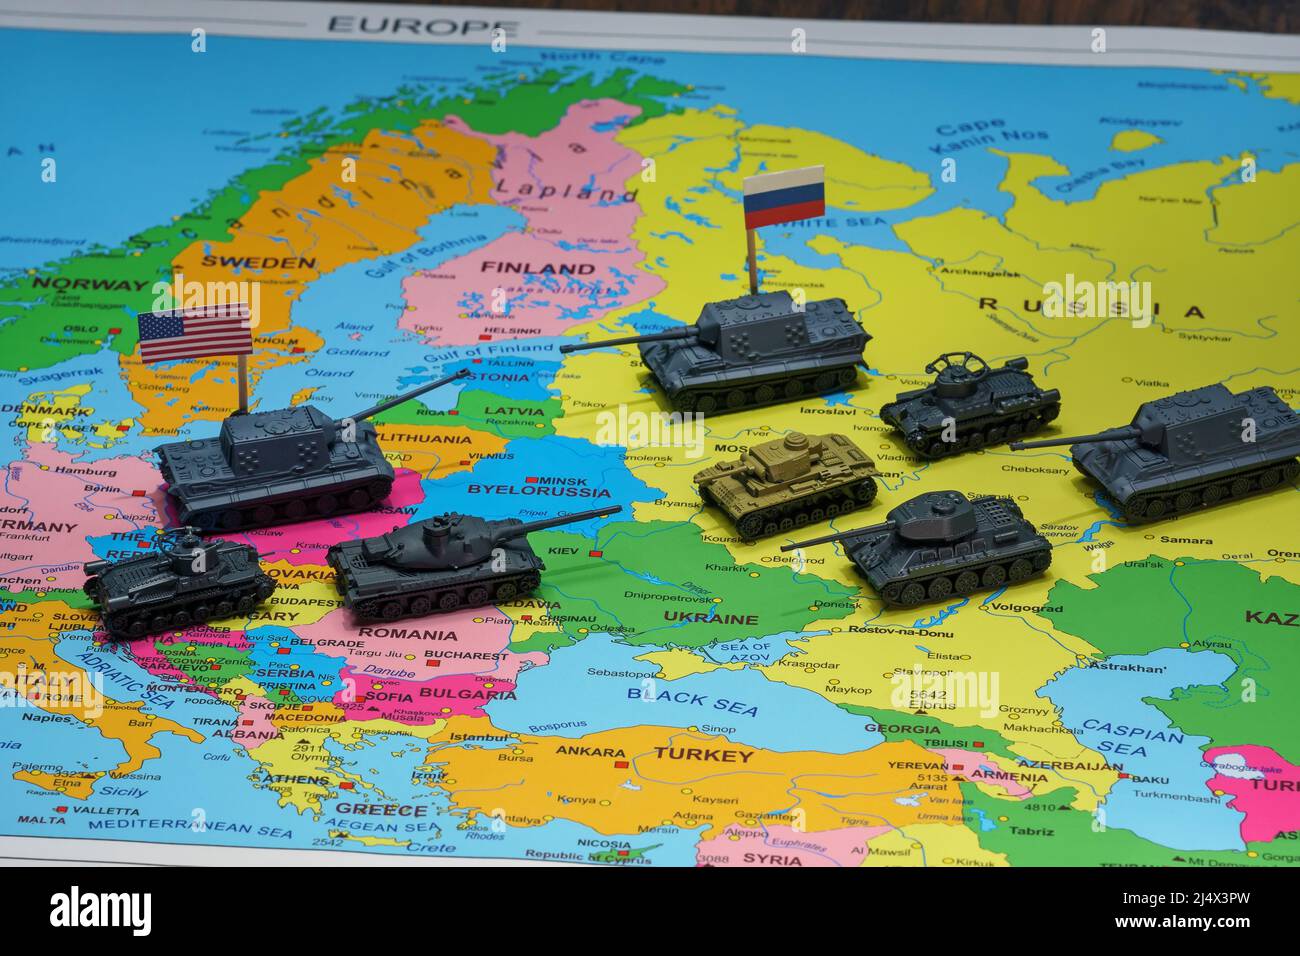 Concept of confrontation between USA and Russia in Europe. Stock Photo